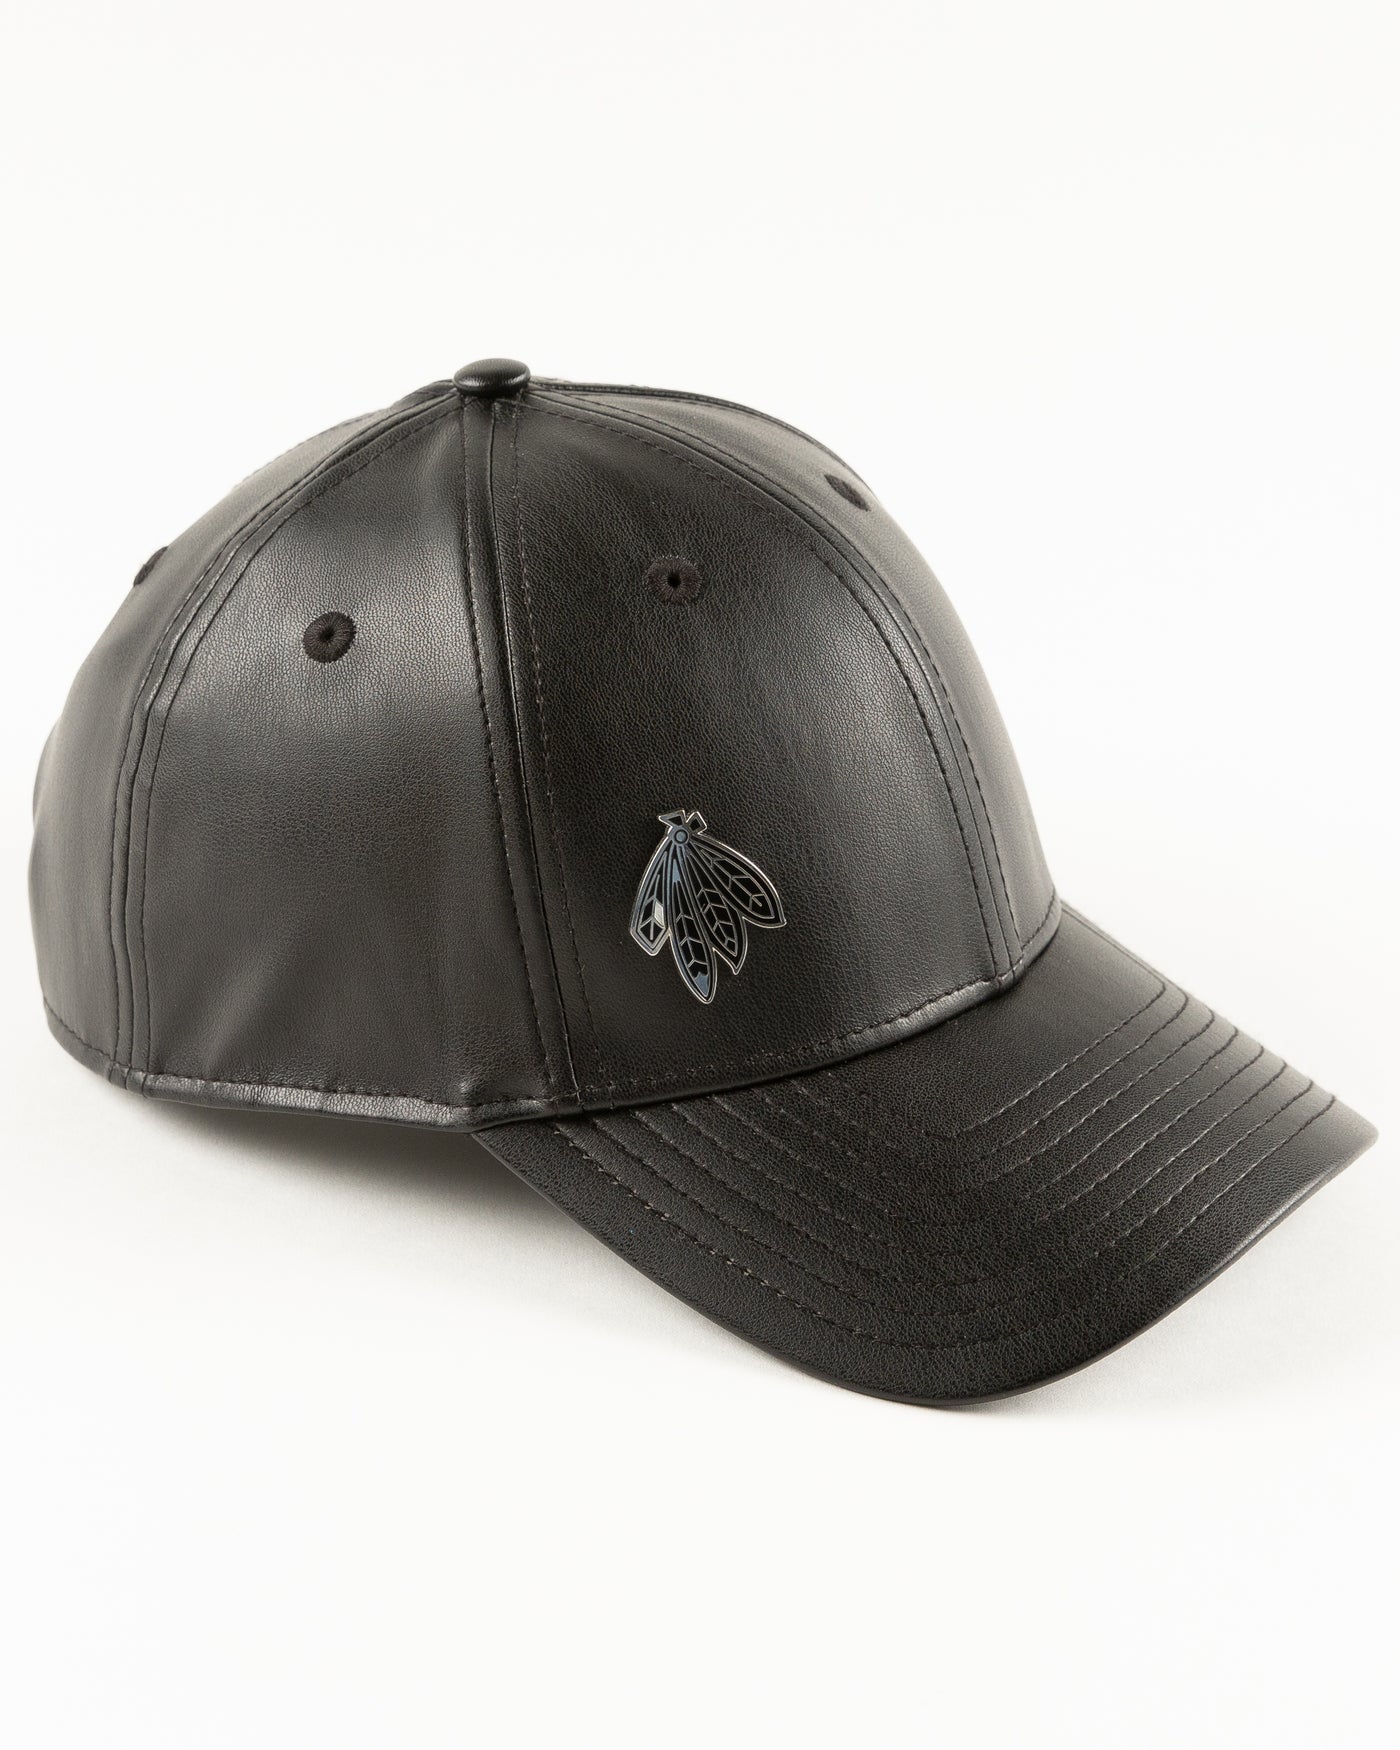 black leather New Era cap with Chicago Blackhawks four feathers logo in silver pin on front - right angle lay flat